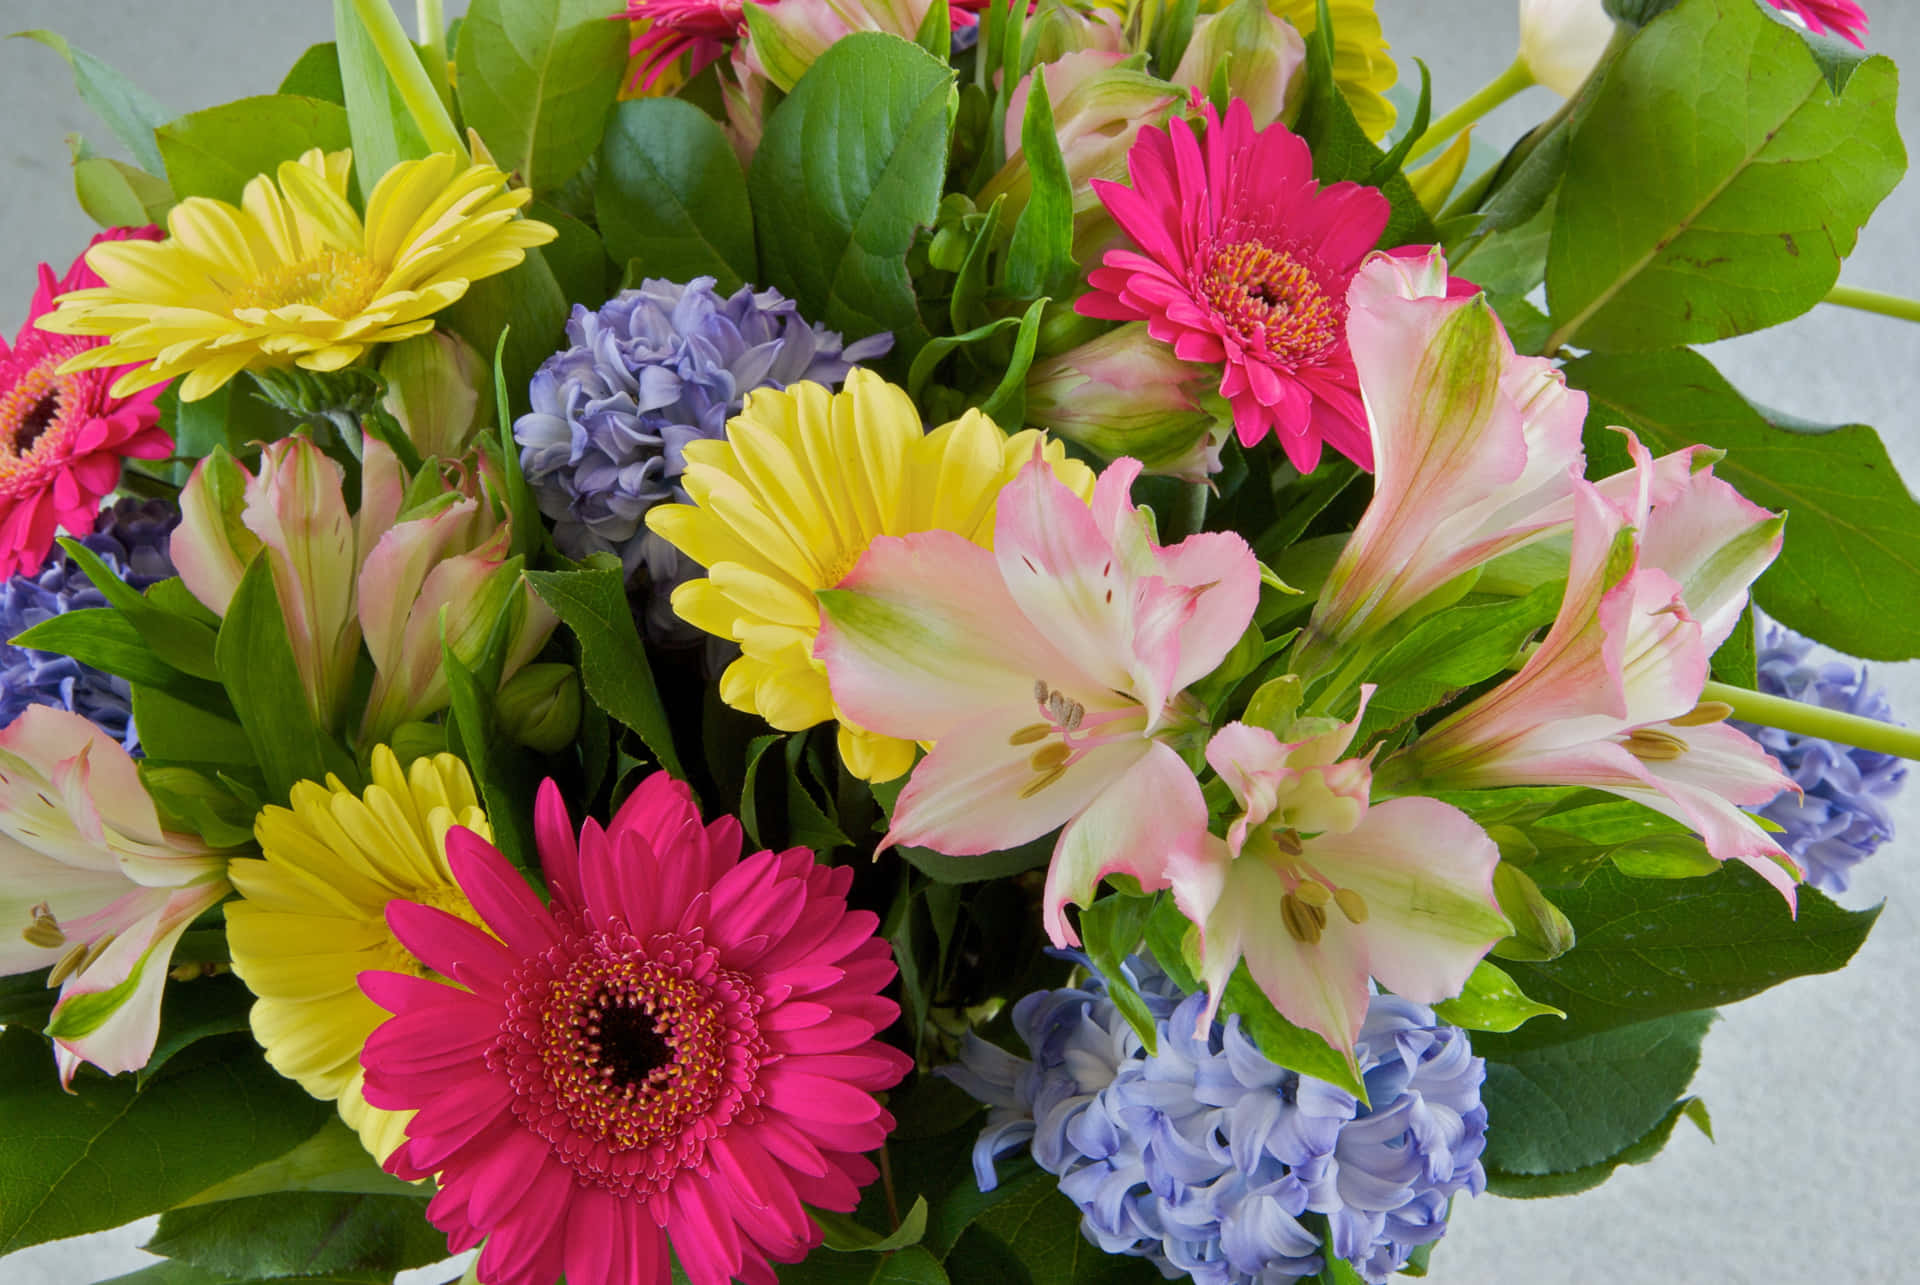 brighten someone's day with a beautiful flower bouquet